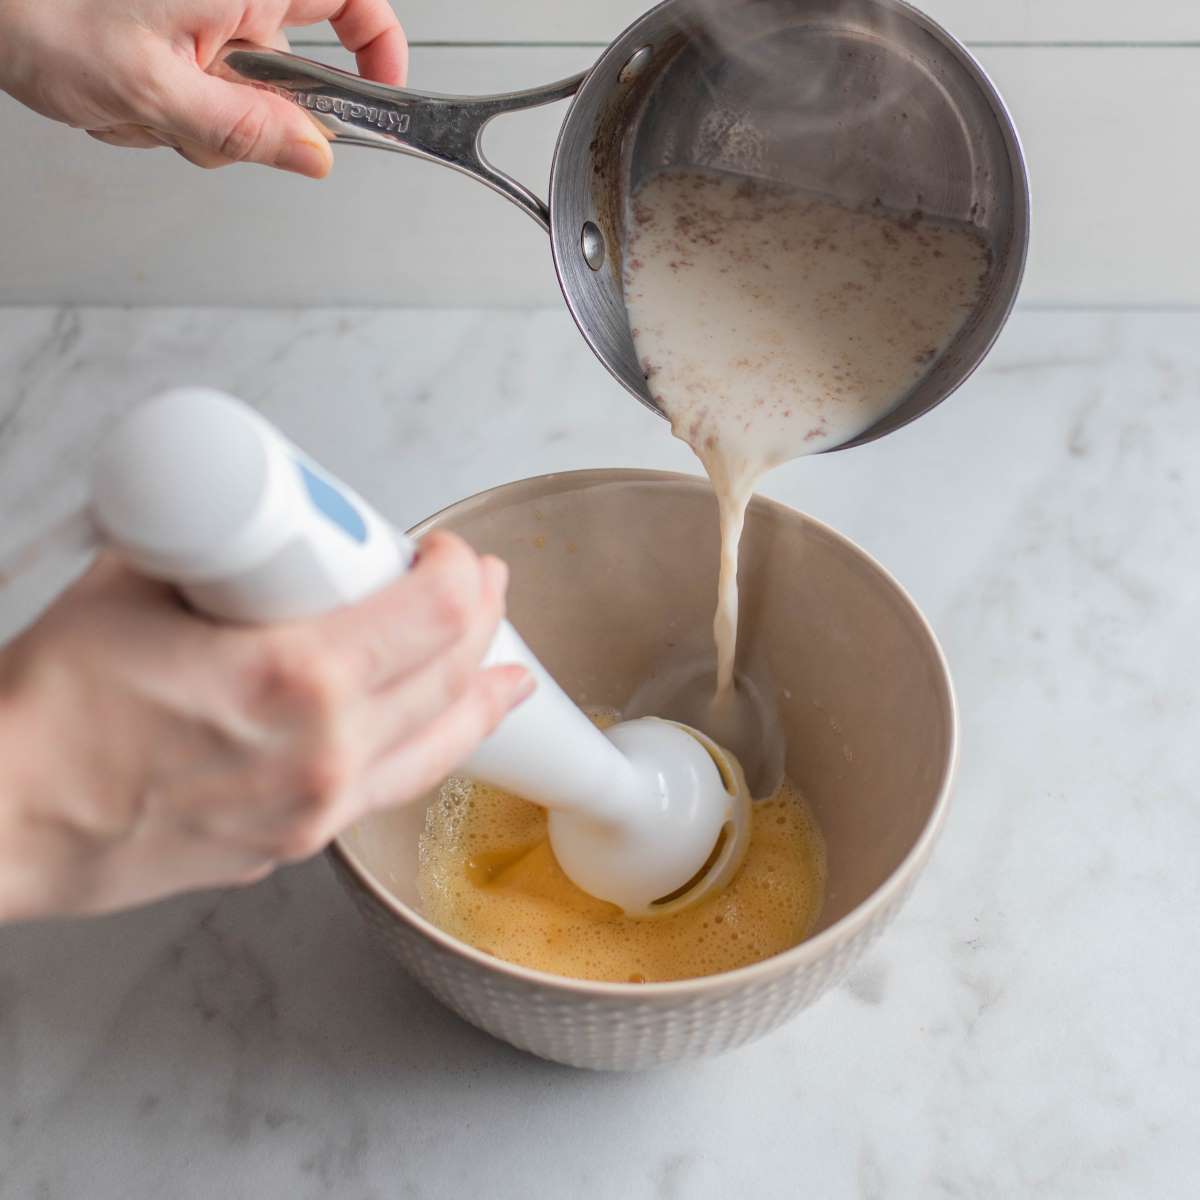 Wet ingredients are poured from a saucepan into the mixing bowl containing the whisked eggs.